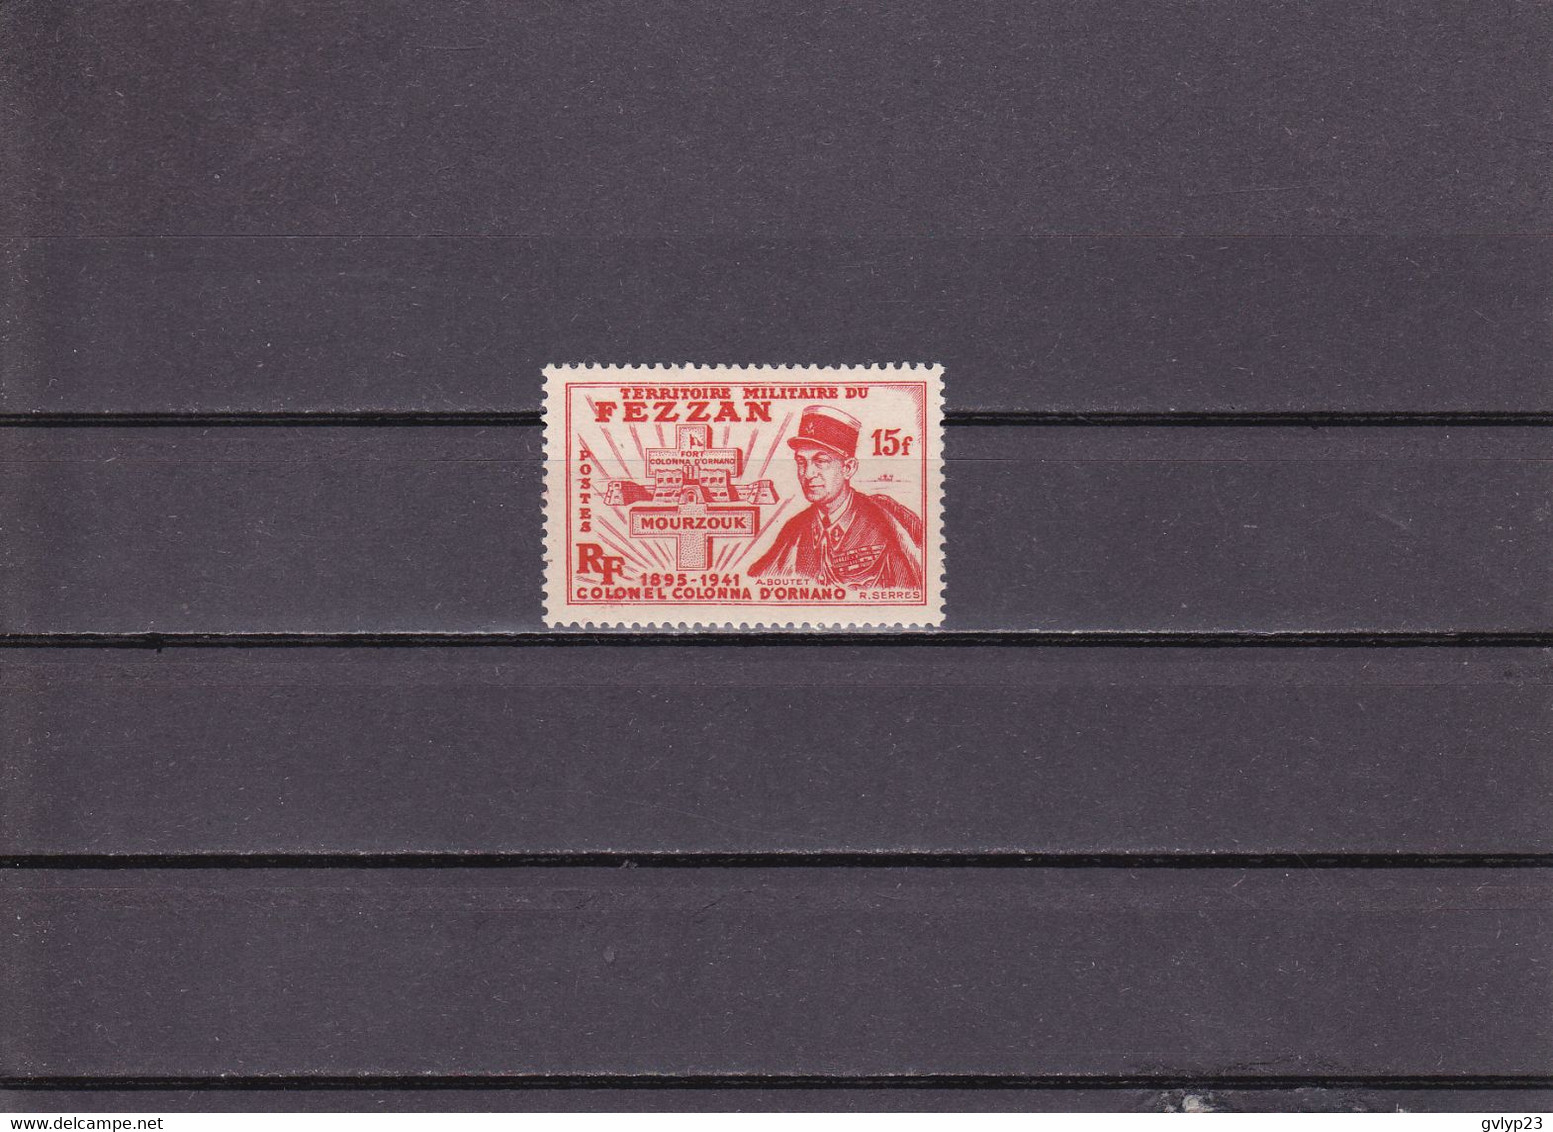 COLONEL COLONNA D'ORNANO/ NEUF ** / 15 F ROUGE N° 50 YVERT ET TELLIER 1949 - Unused Stamps